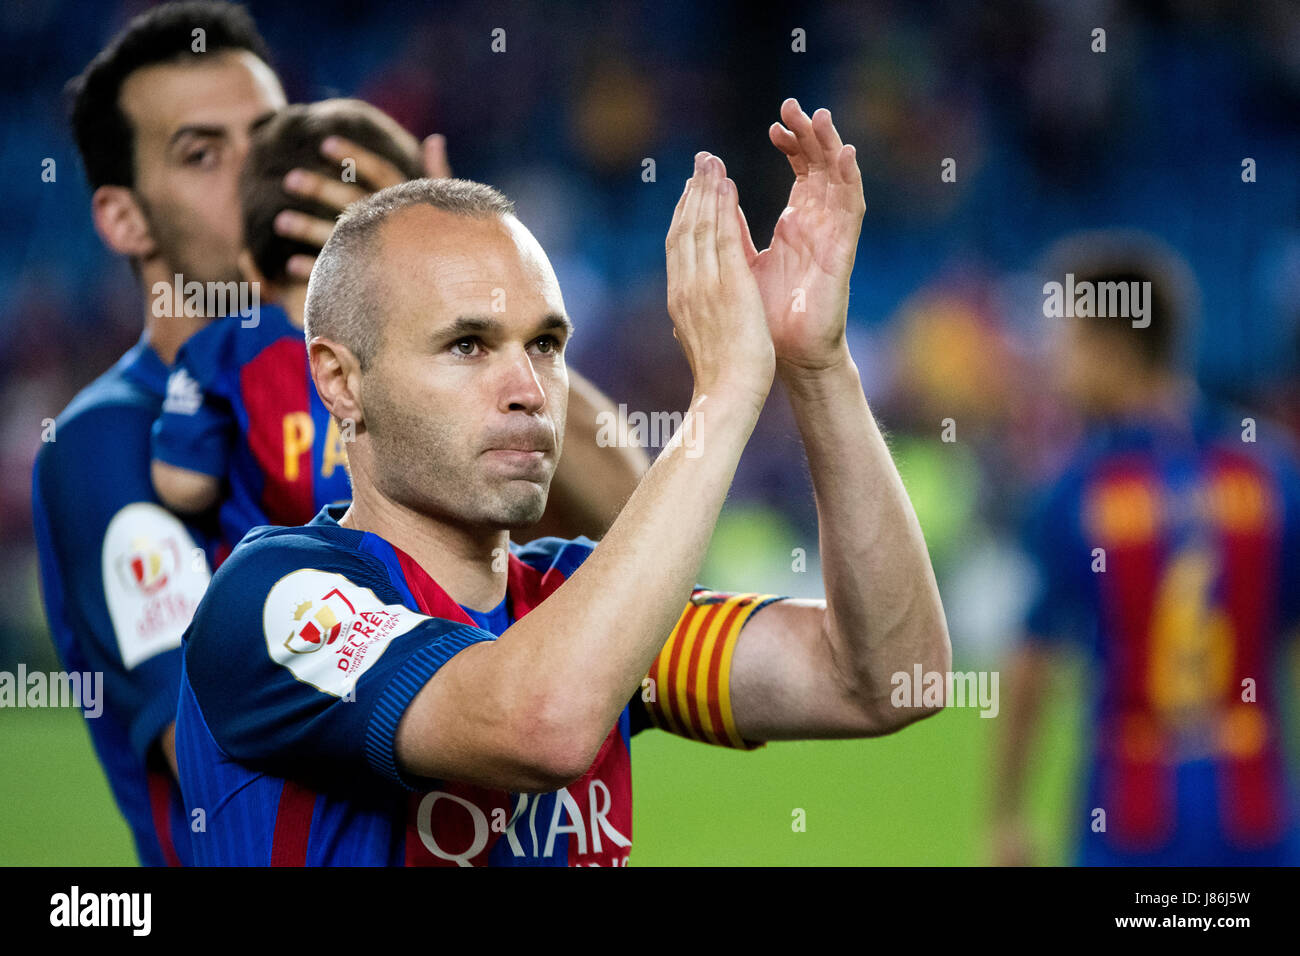 Madrid, Spain. 27th May, 2017. Andres Iniesta (FC Barcelona) celebrates the victory of his team during the football match of Final of Spanish King's Cup between FC Barcelona and Deportivo Alaves near of Calderon Stadium on May 27, 2017 in Madrid, Spain. Credit: David Gato/Alamy Live News Stock Photo